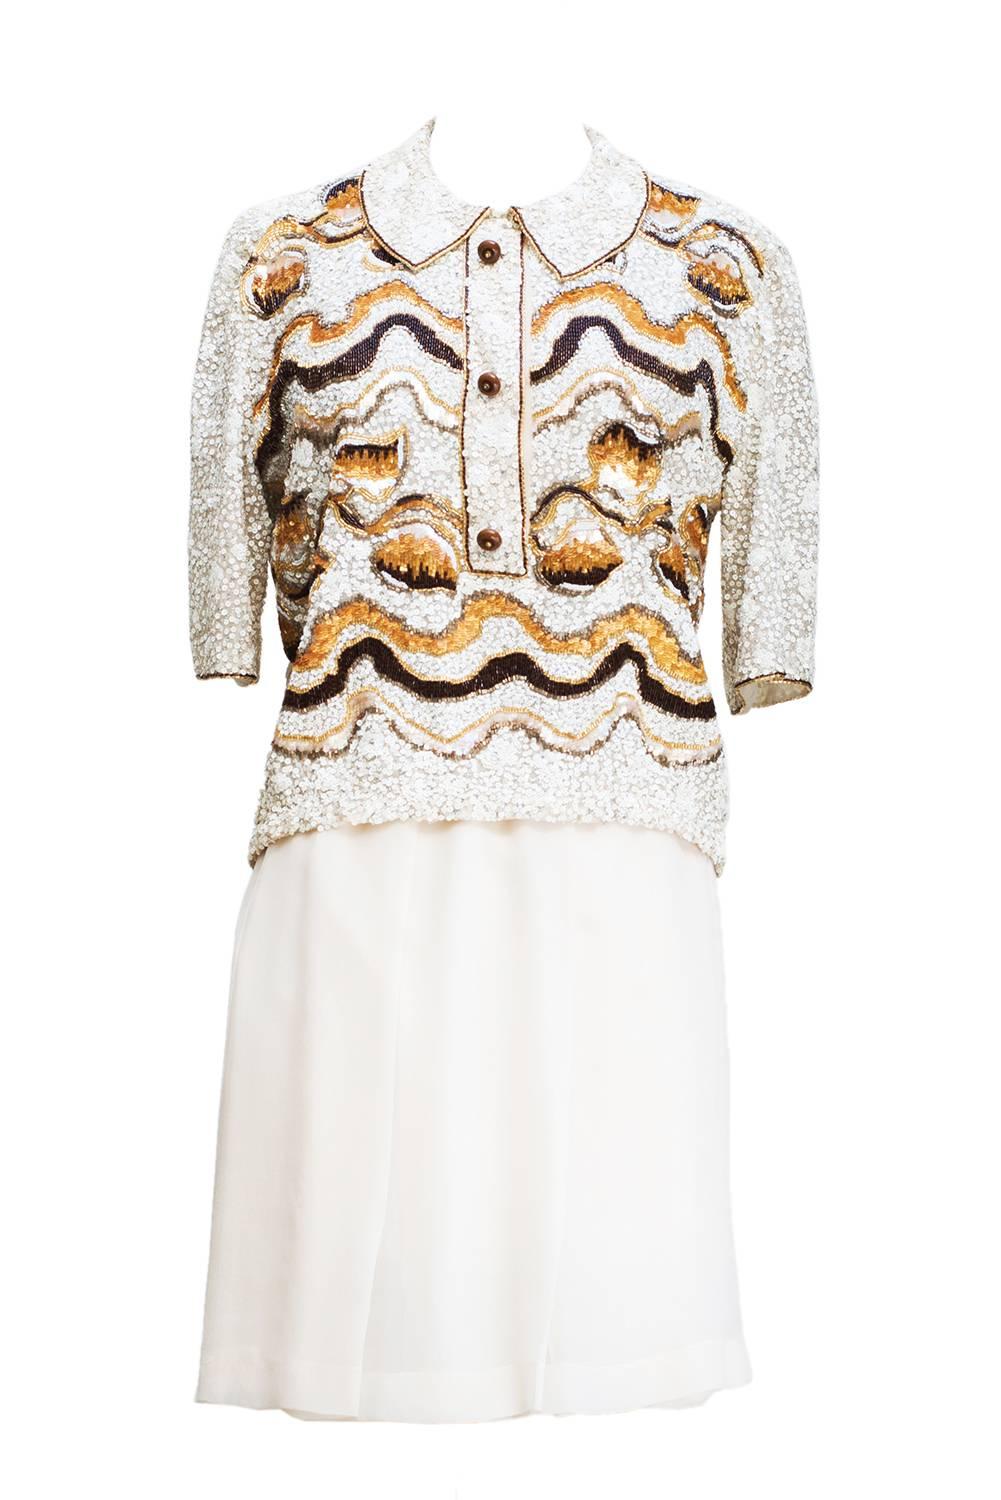 Chirstian Dior Paris, Spring/Summer Collection 1986 Haute Couture, Sequined, Top For Sale 2